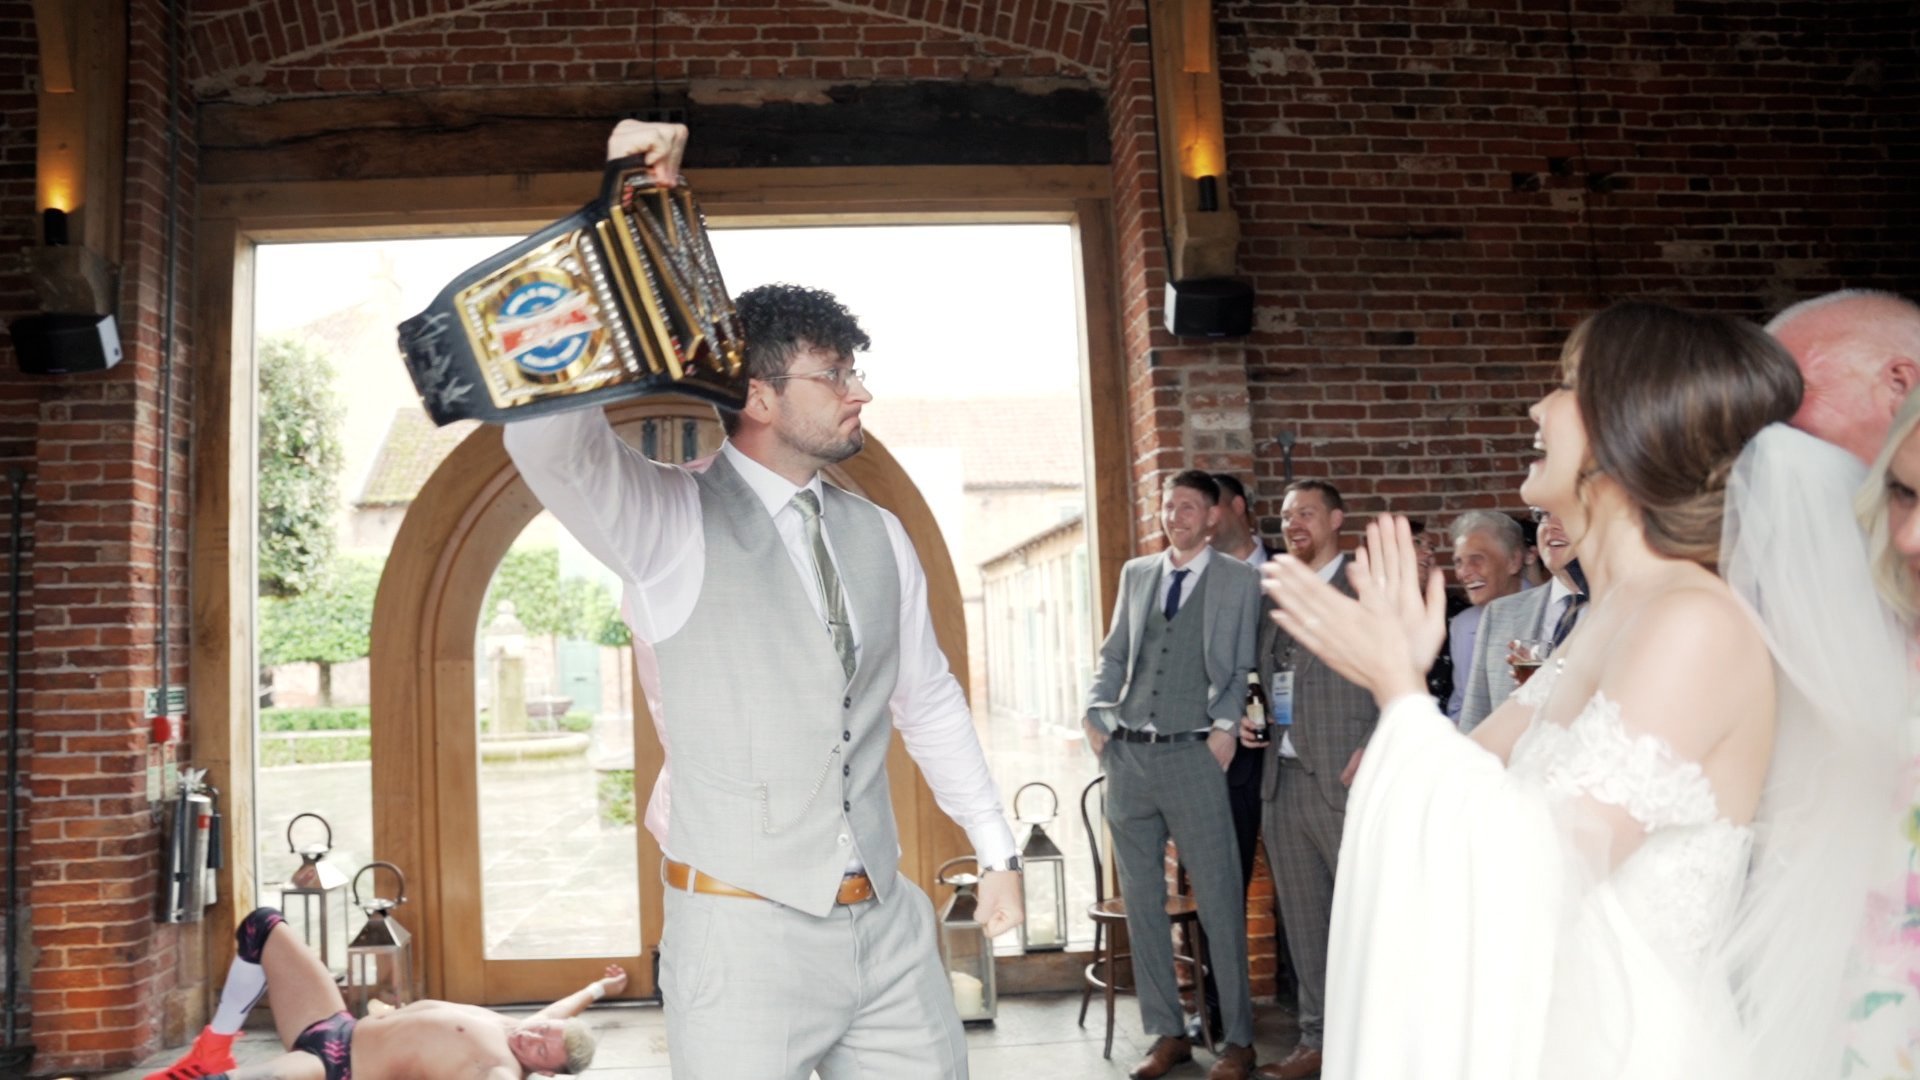 Groom at his wrestling themed wedding holding up a wrestling belt as wedding guests and bride cheer